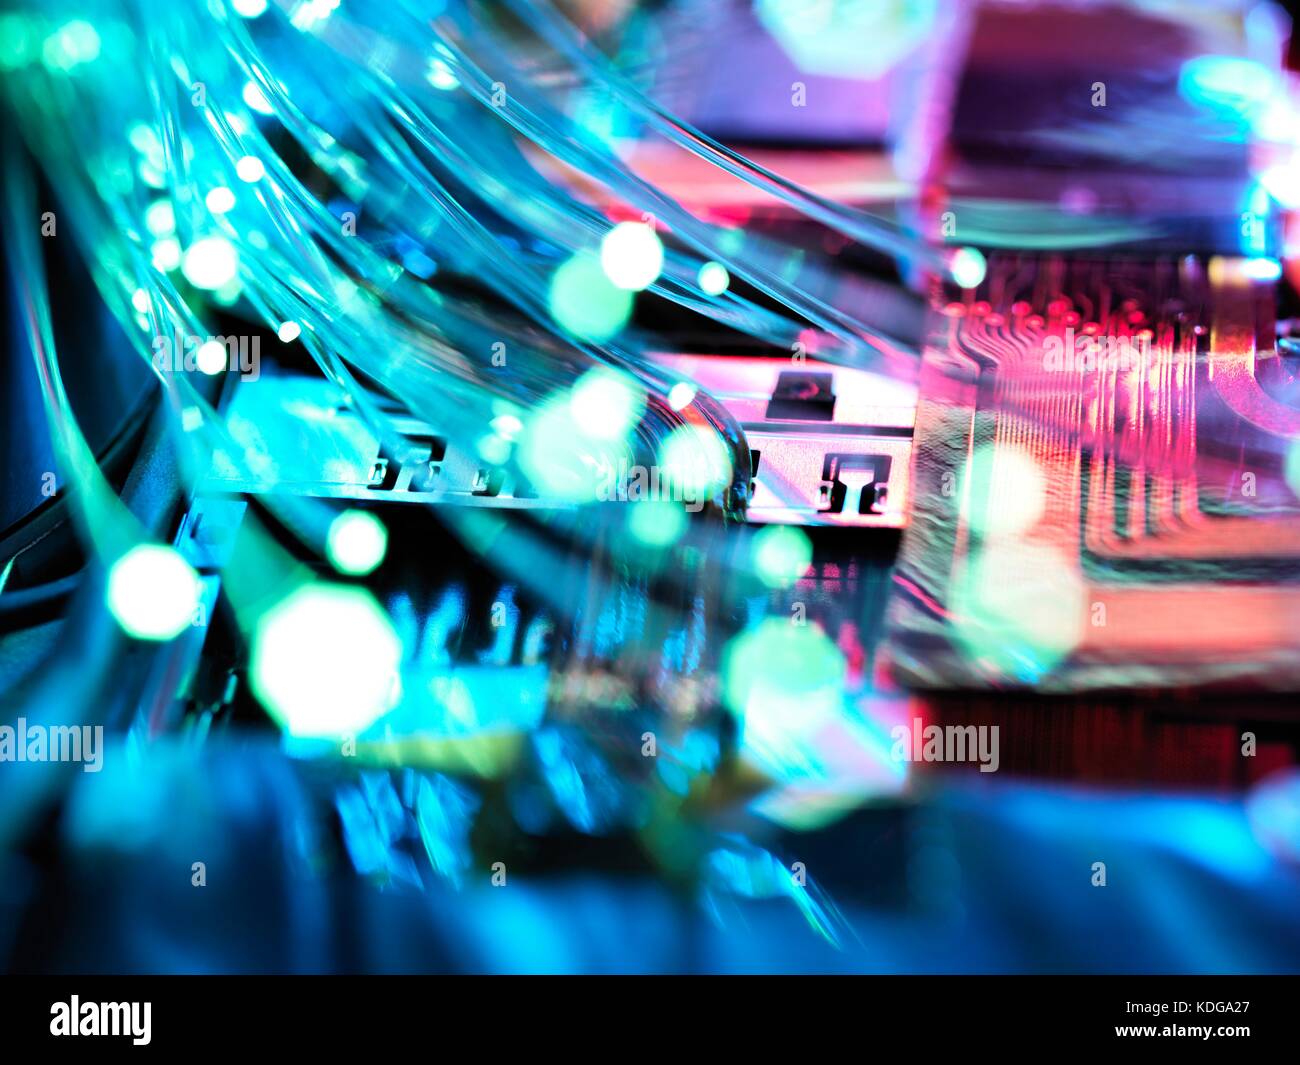 Fibre optic strands carrying data, with electronics of a laptop in the background. Stock Photo